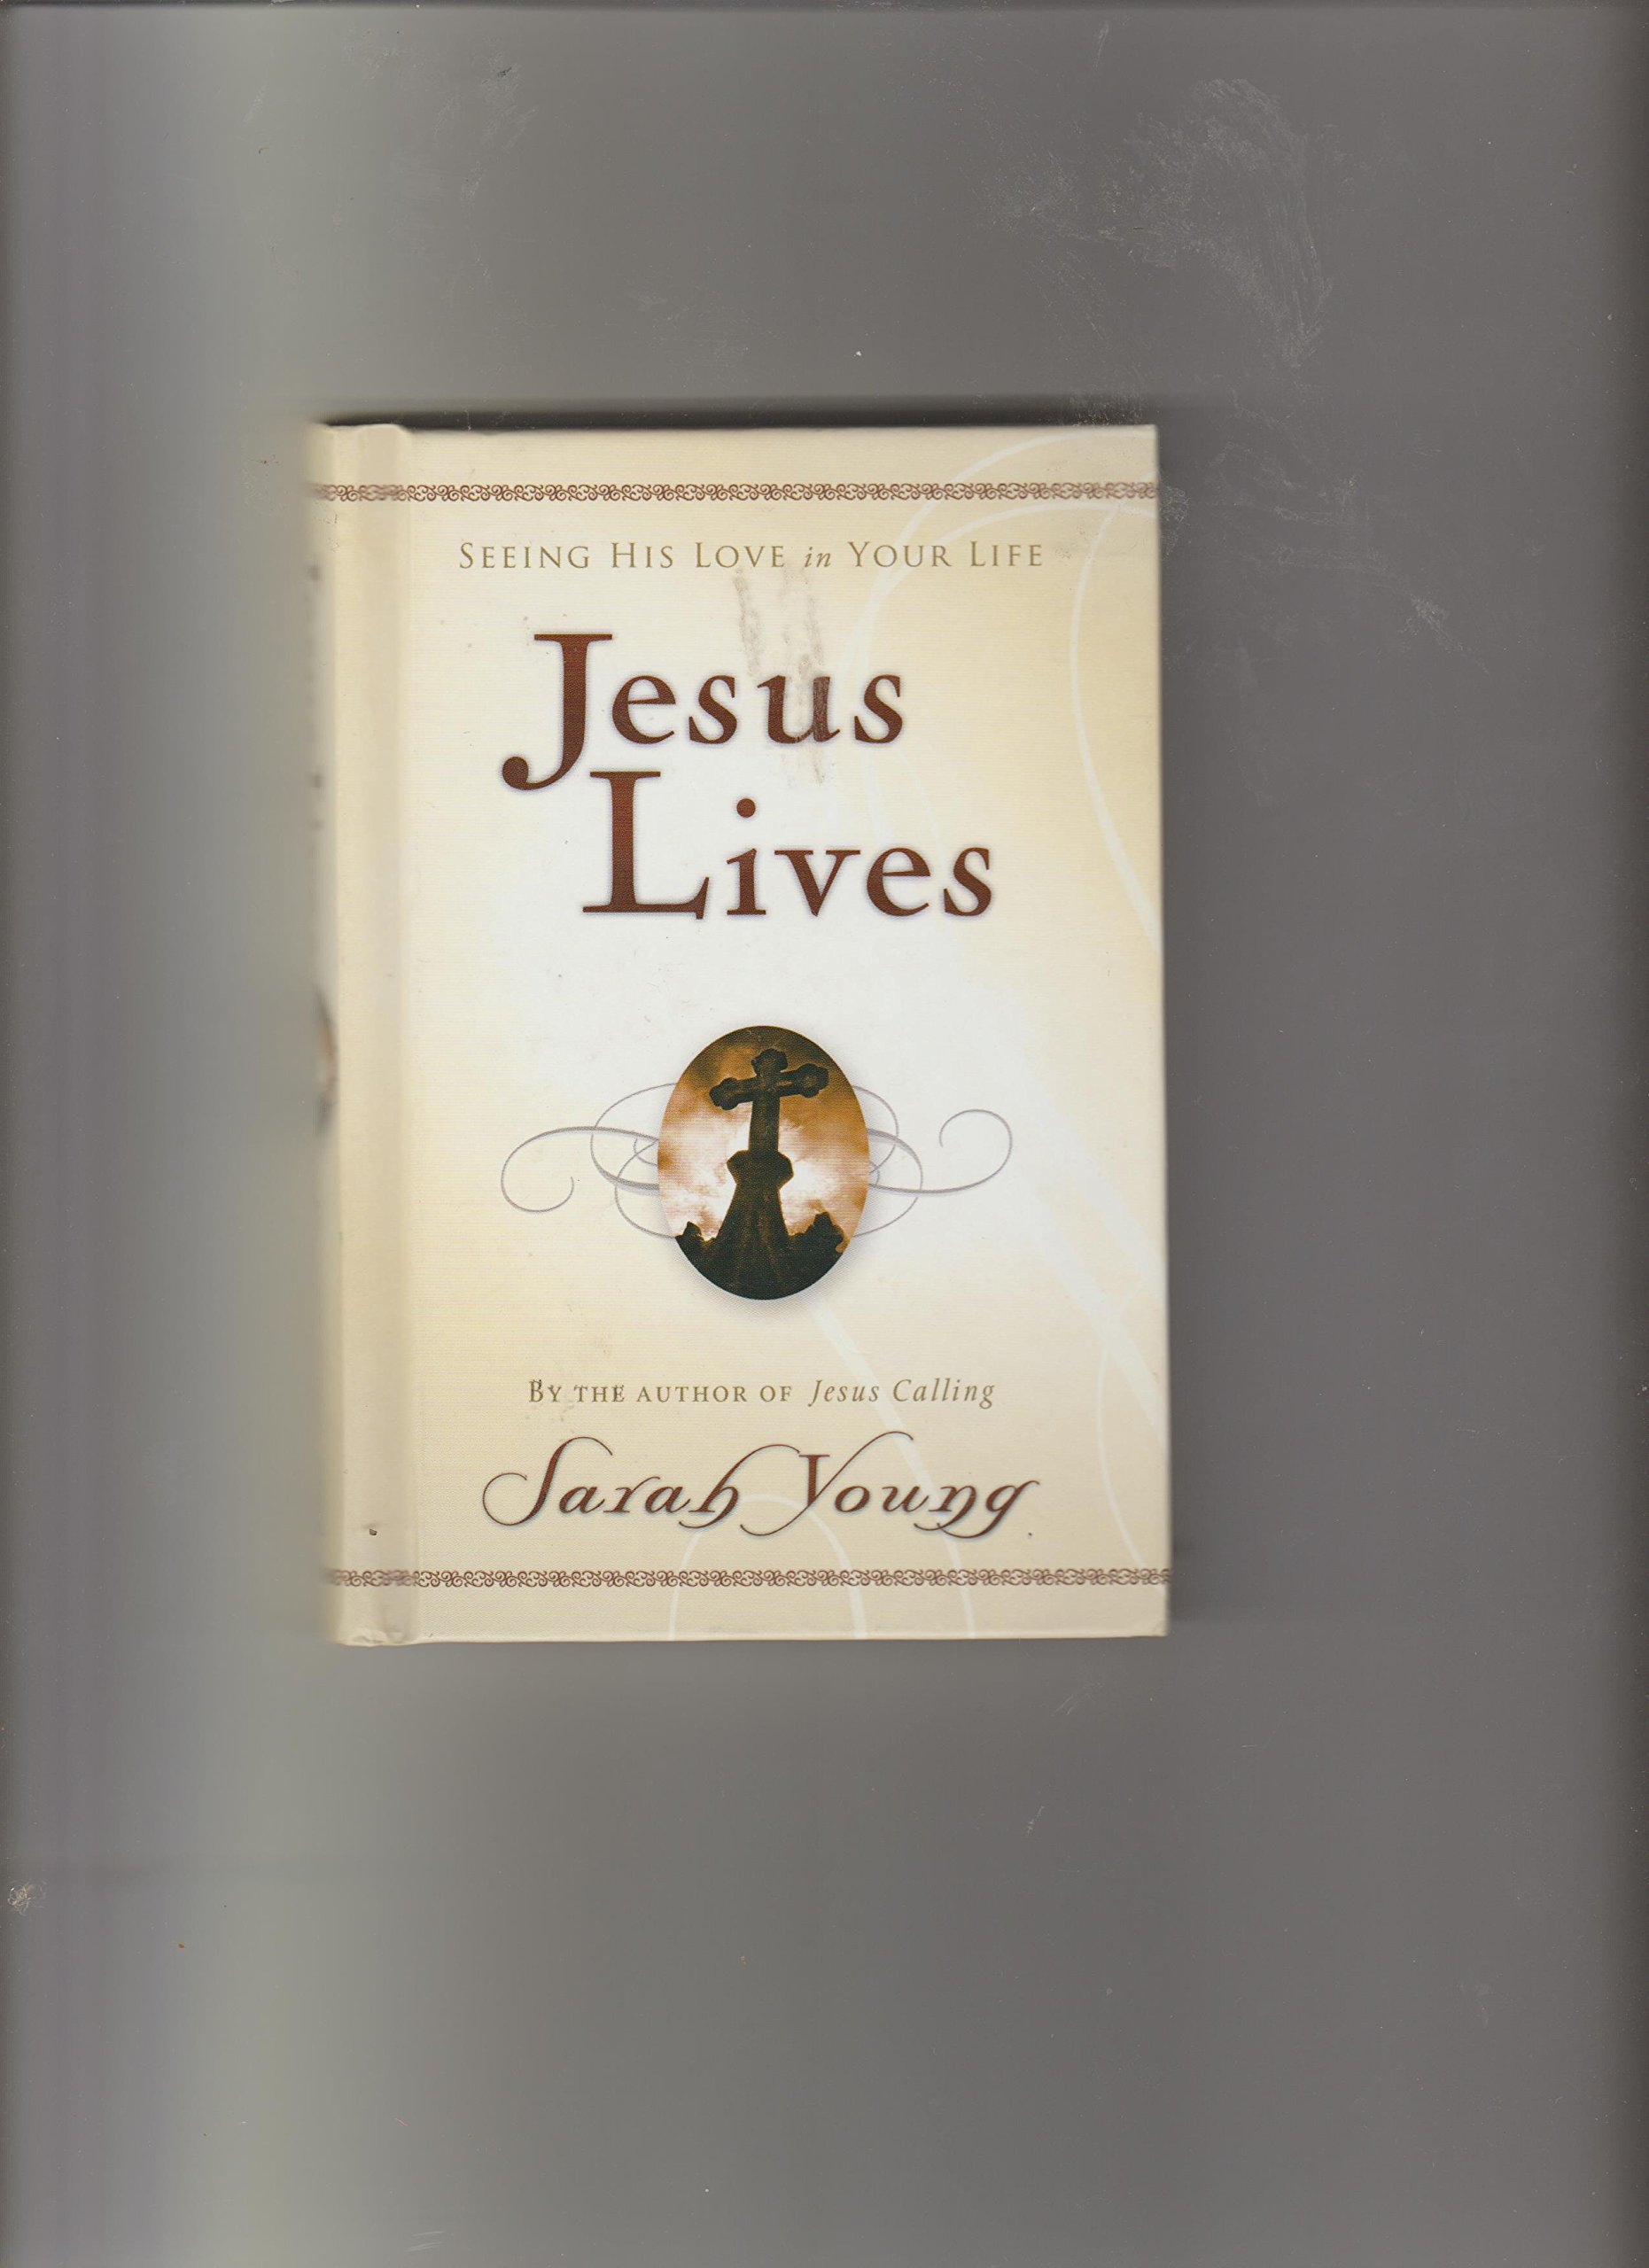 JESUS LIVES BY SARAH YOUNG - The Bible Outlet